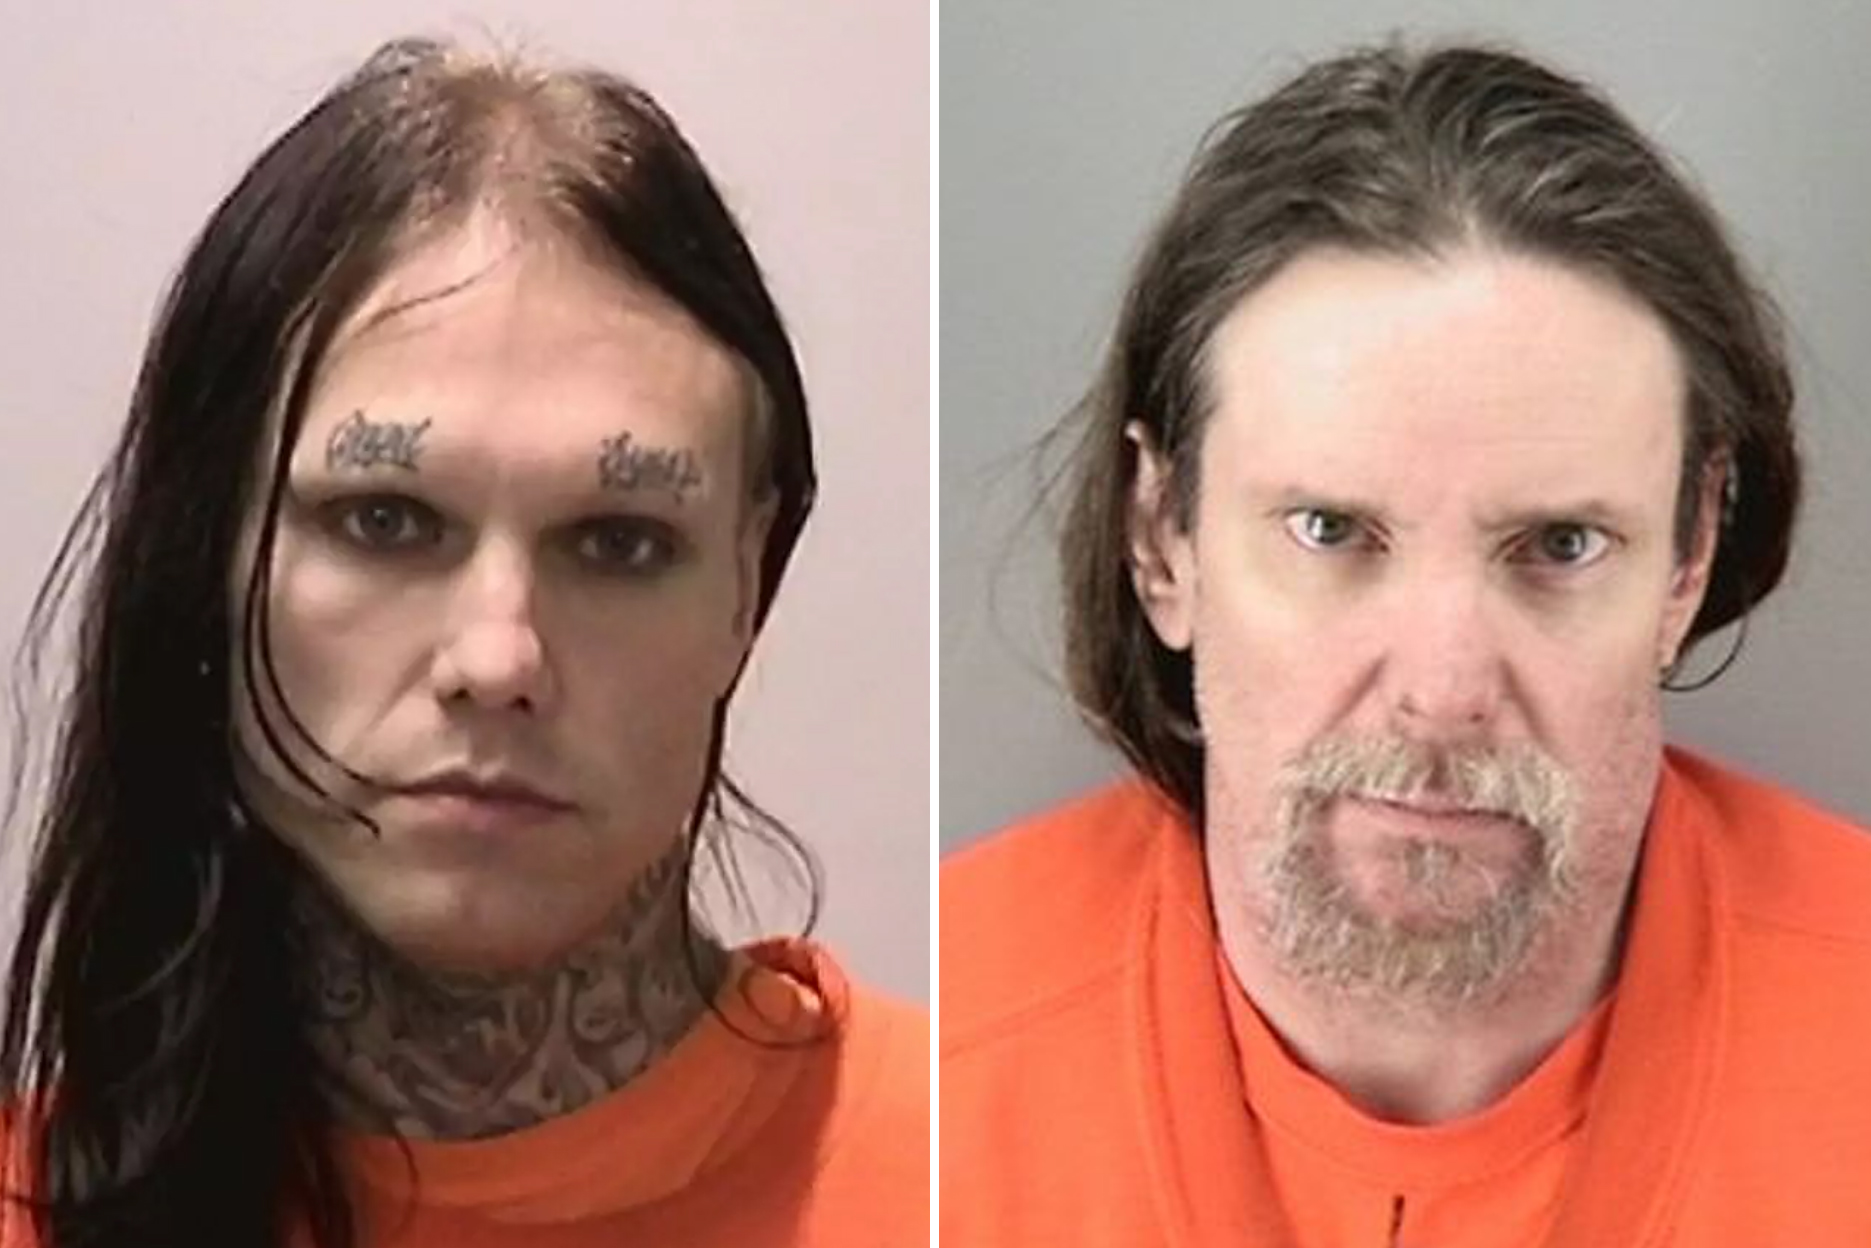 Two mugshots side by side, one of a tattooed individual, the other of an older, bearded man. Both wear orange prison garb.